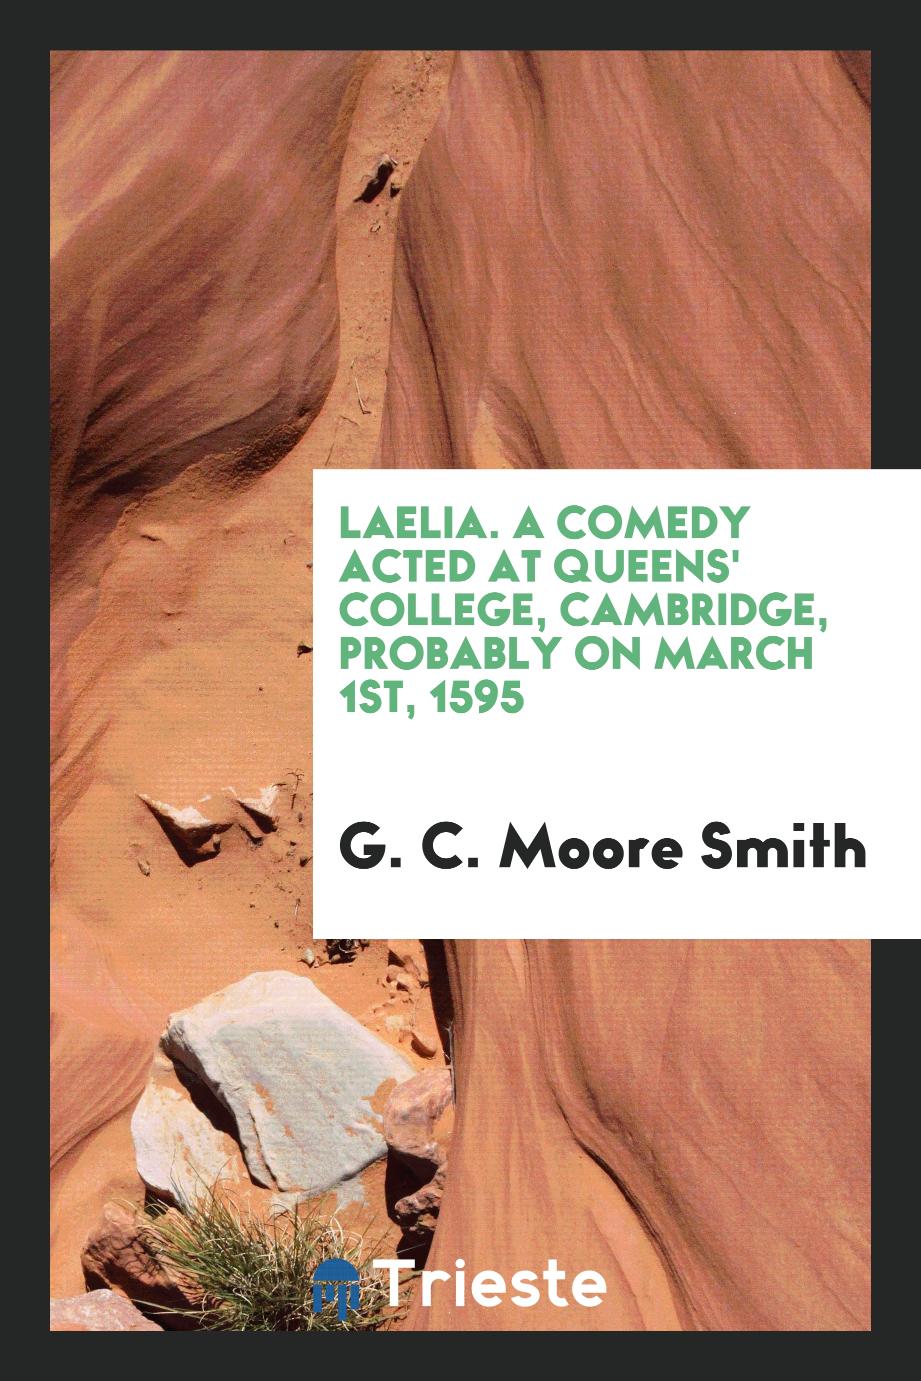 G. C. Moore Smith - Laelia. A comedy acted at Queens' College, Cambridge, probably on March 1st, 1595